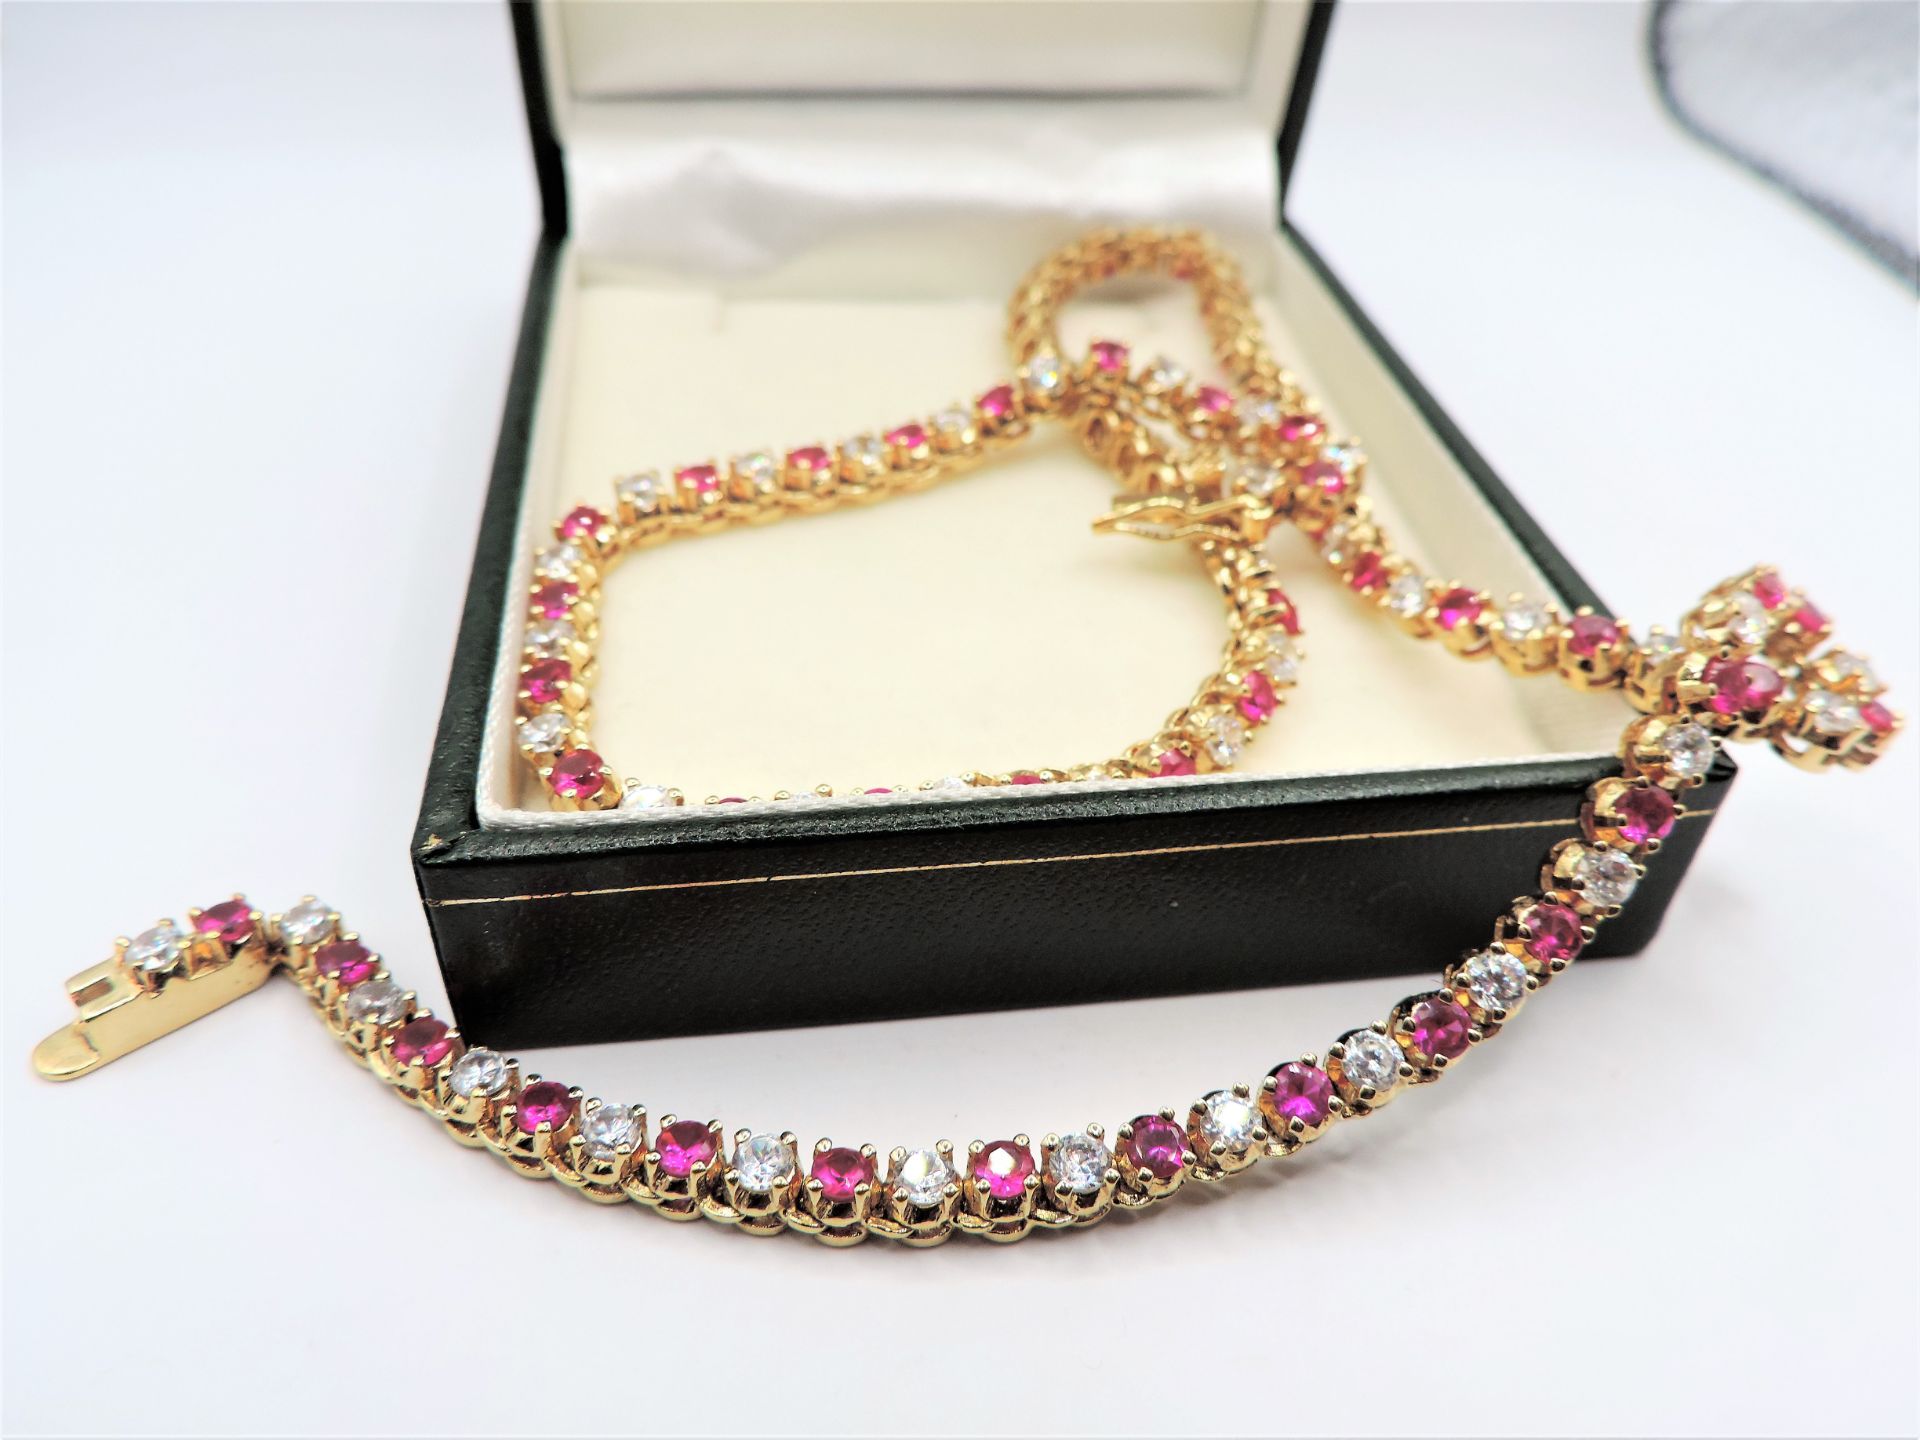 12 carat Gold on Sterling Silver Pink & White Tourmaline Tennis Necklace New with Gift Box - Image 4 of 4